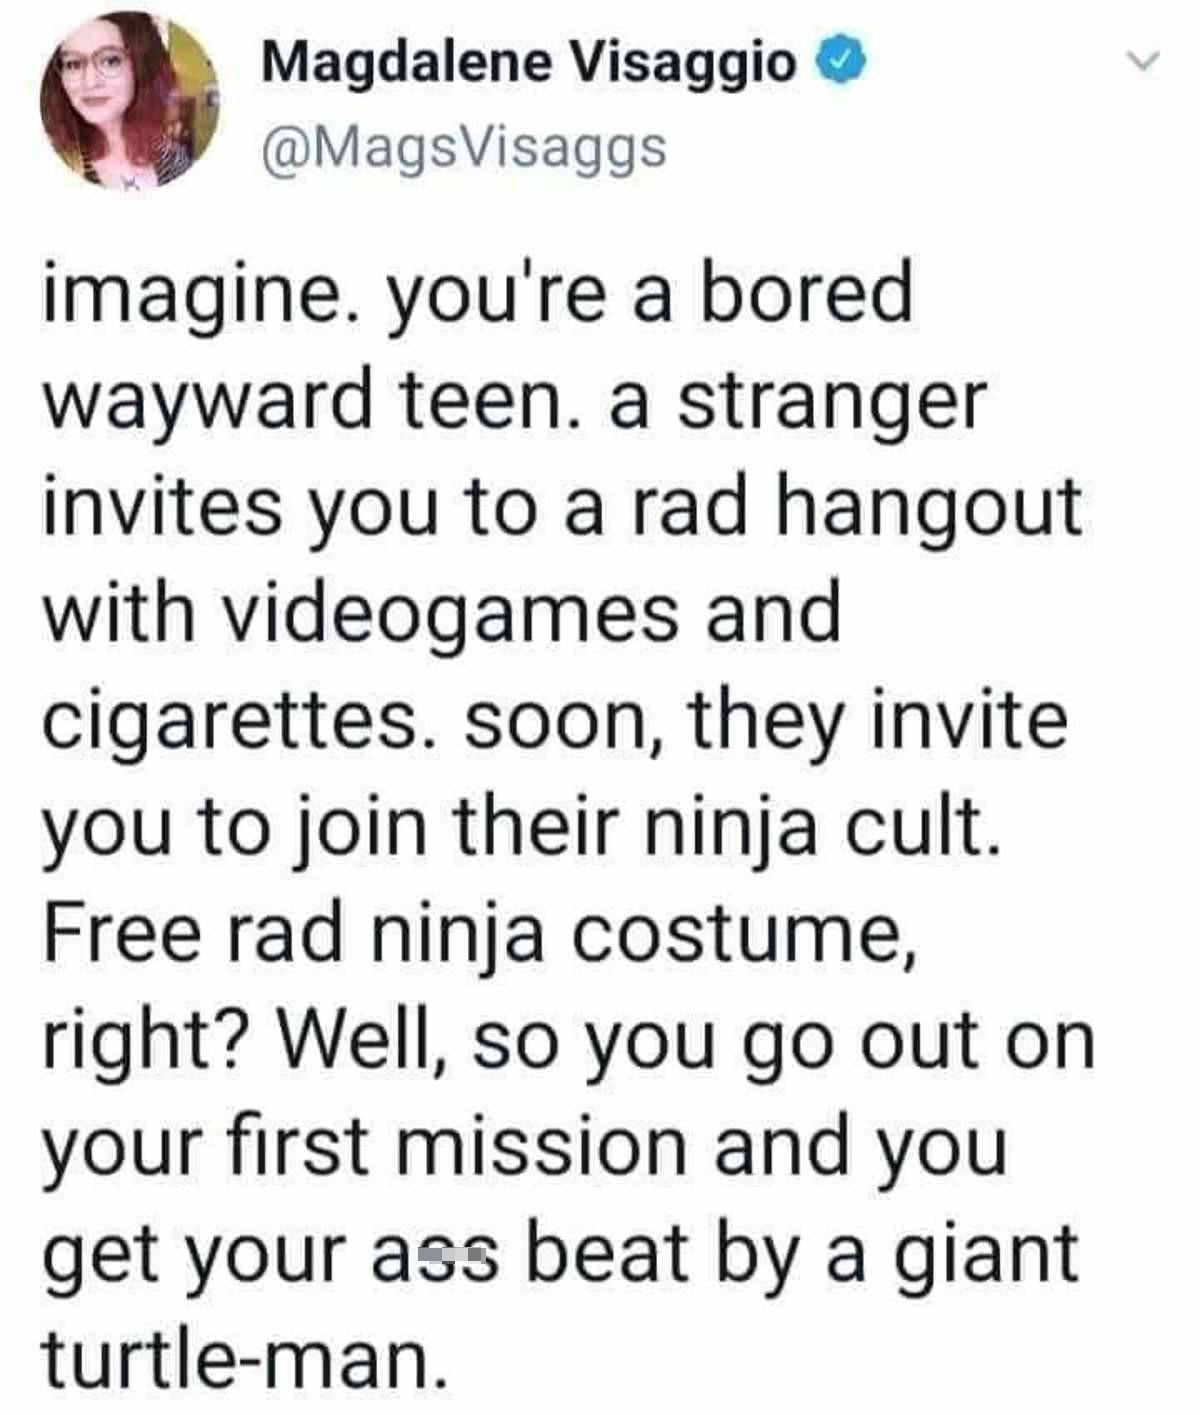 monday morning randomness - News - Magdalene Visaggio imagine. you're a bored wayward teen. a stranger invites you to a rad hangout with videogames and cigarettes. soon, they invite you to join their ninja cult. Free rad ninja costume, right? Well, so you